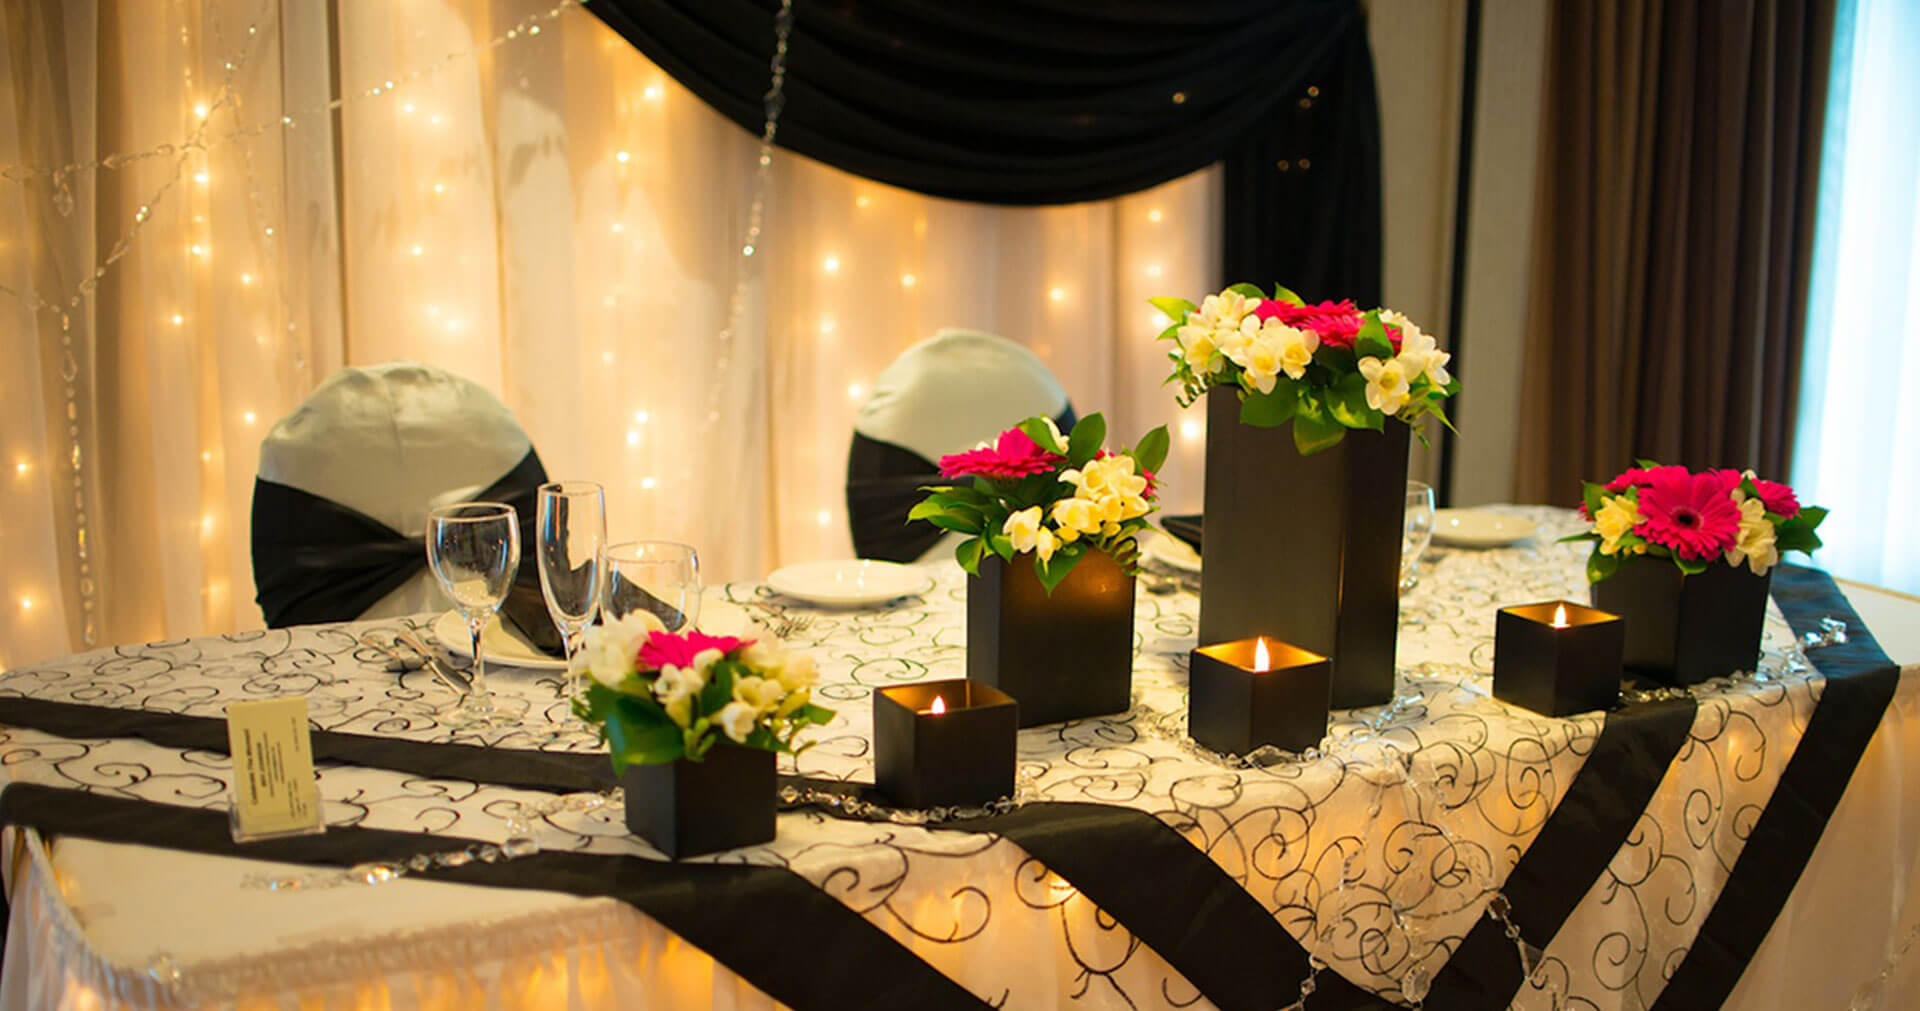 Dining table set in black and white theme with flowers and candles